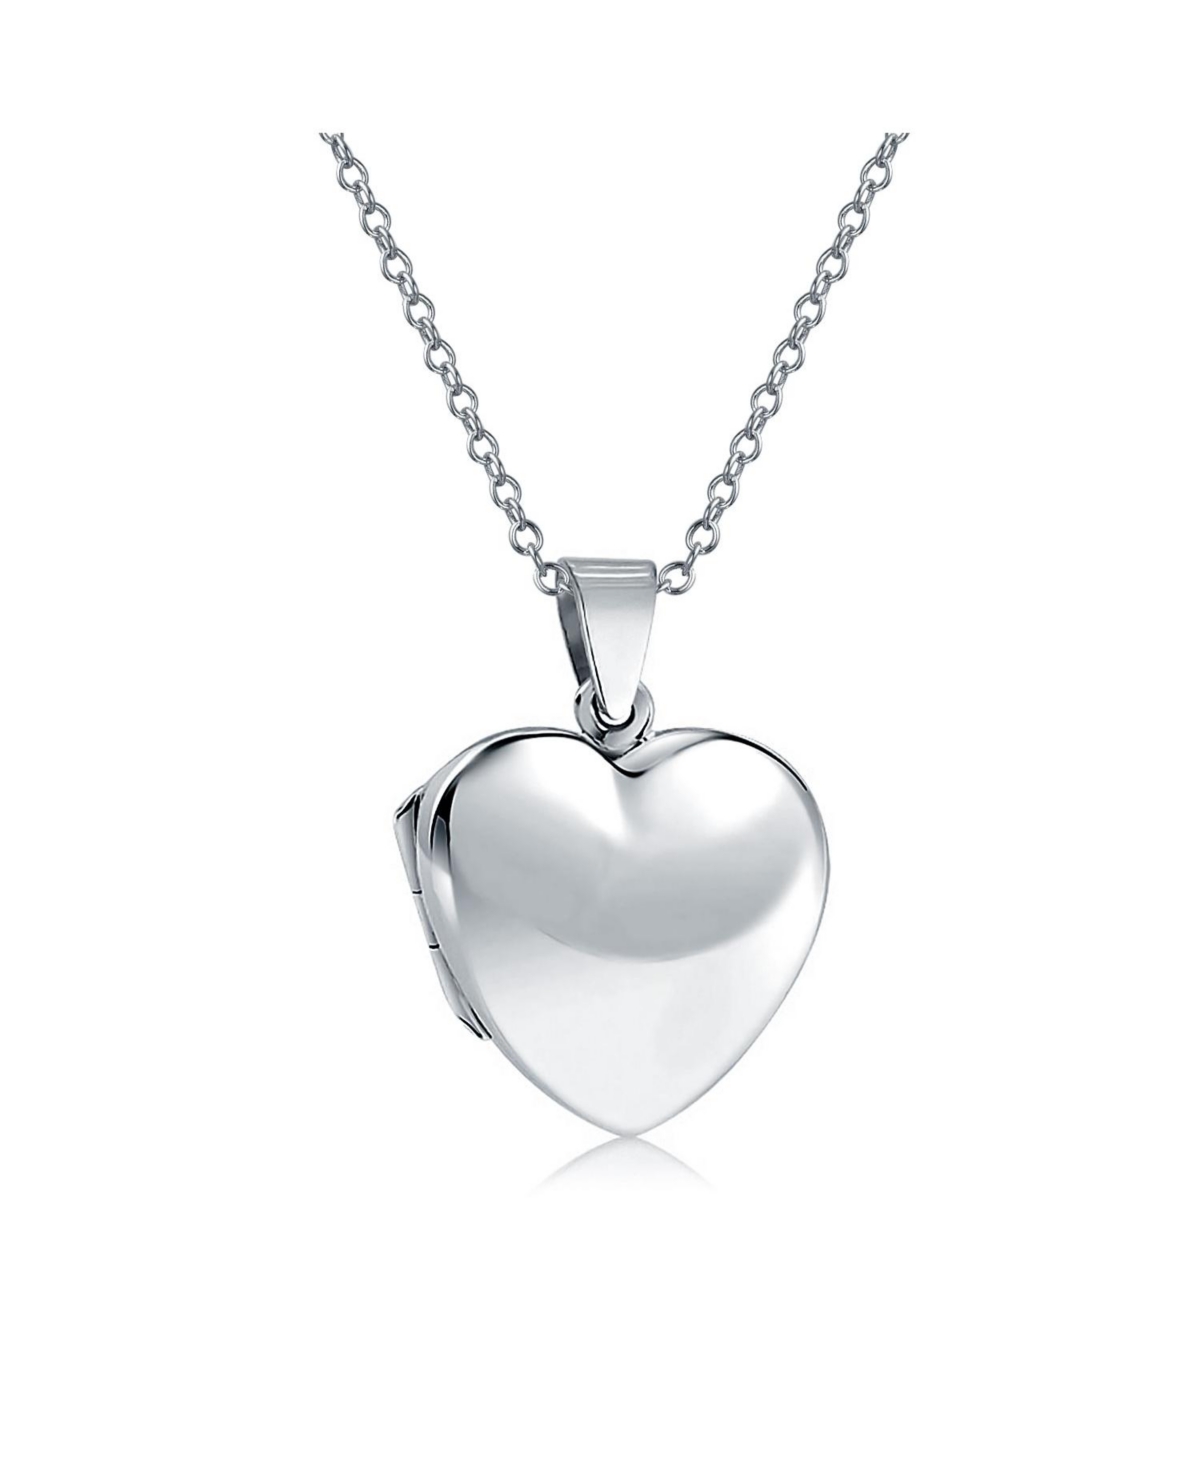 Simple Plain Puff Heart Shaped Photo Lockets For Women That Hold Pictures Polished .925 Silver Locket Necklace Pendant - Silver